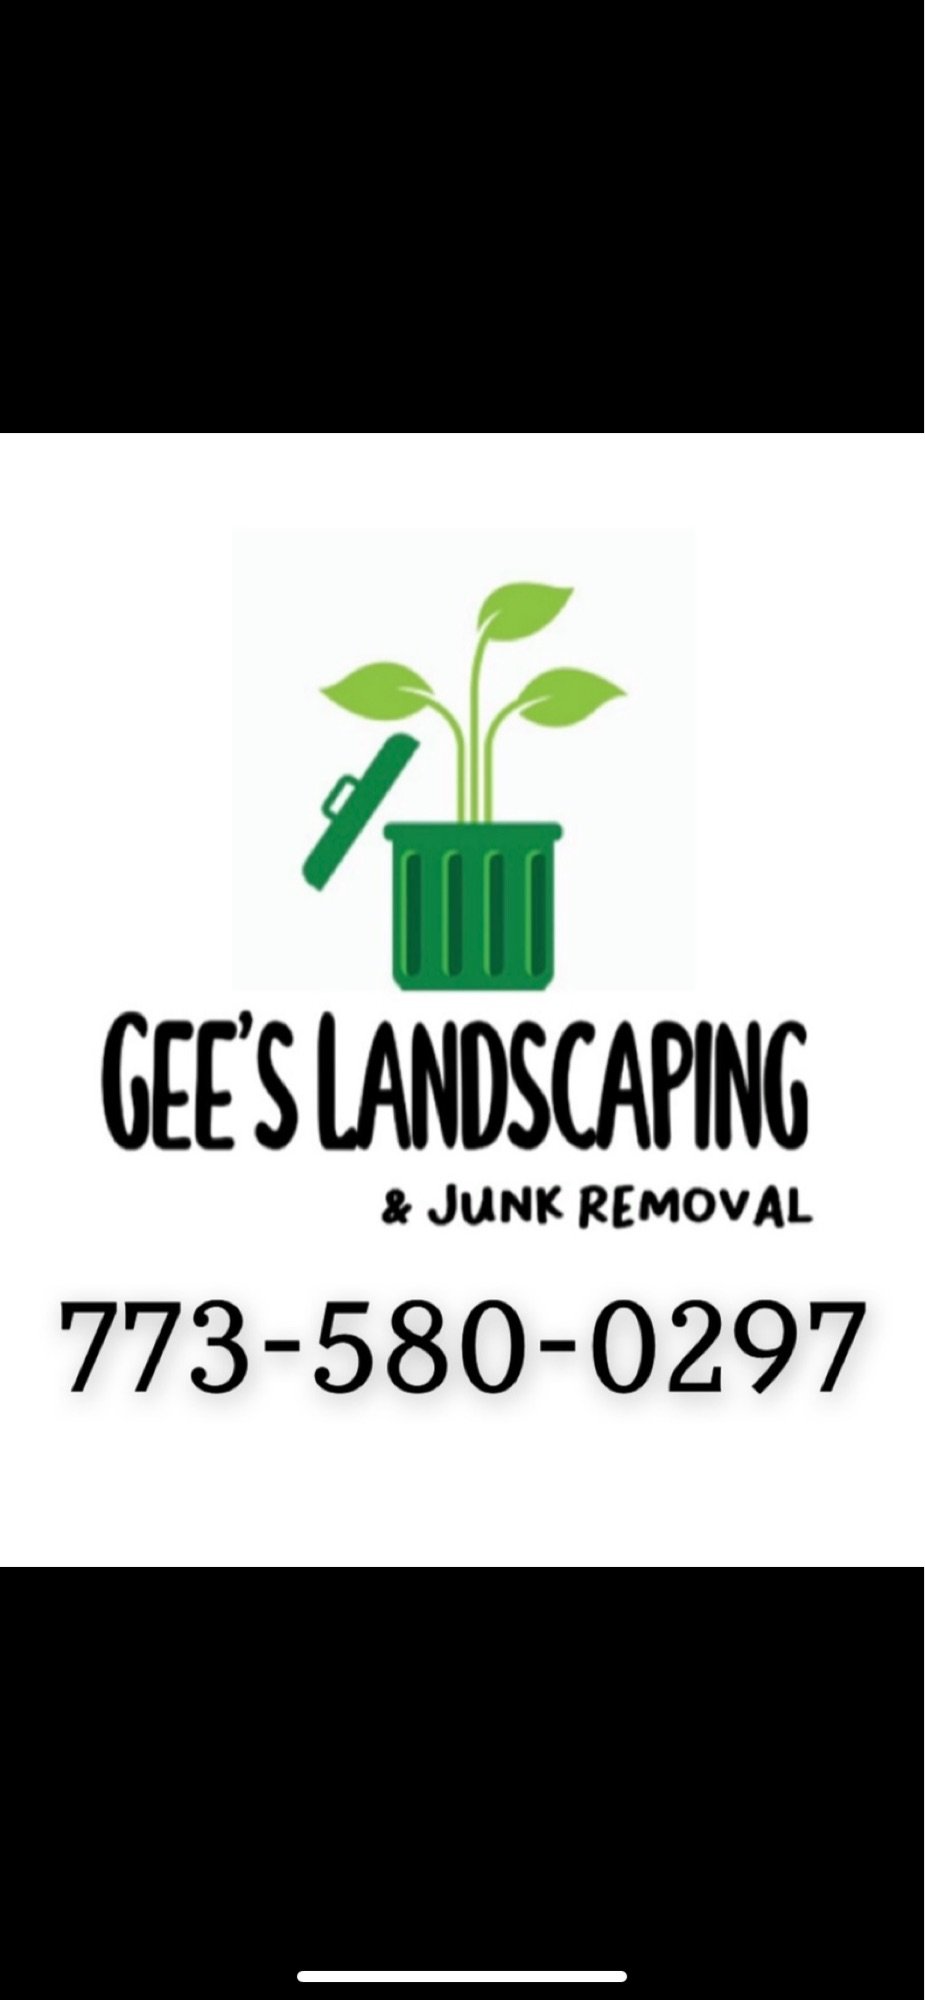 Gee's Landscaping & Junk Removal Logo